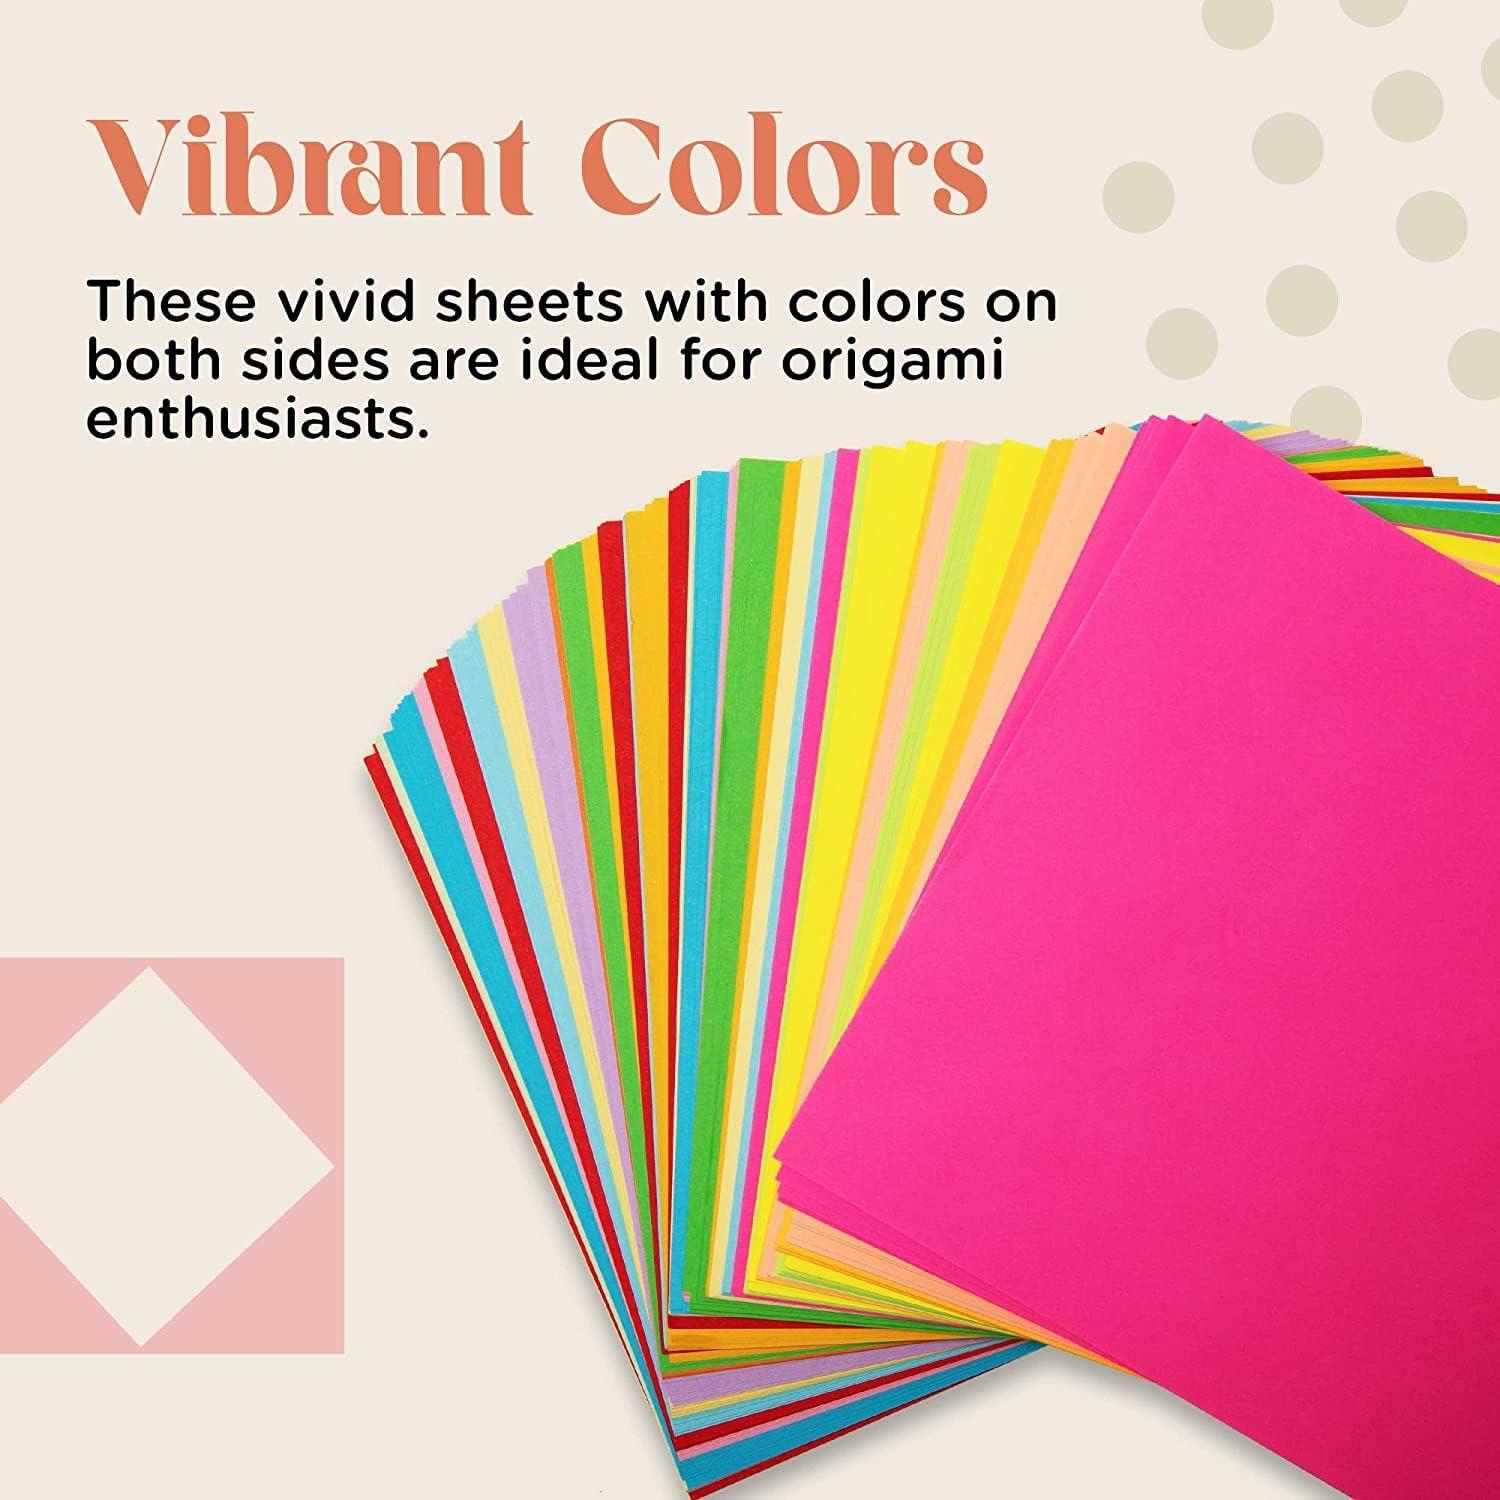 Origami Paper - 1100 Sheets - Double Sided 6x6 inches Origami Squares - 15  Vibrant Colors - Origami Set for Kids - Easy Fold Origami Papers for Arts &  Crafts - Quality Paper Origami Sheets